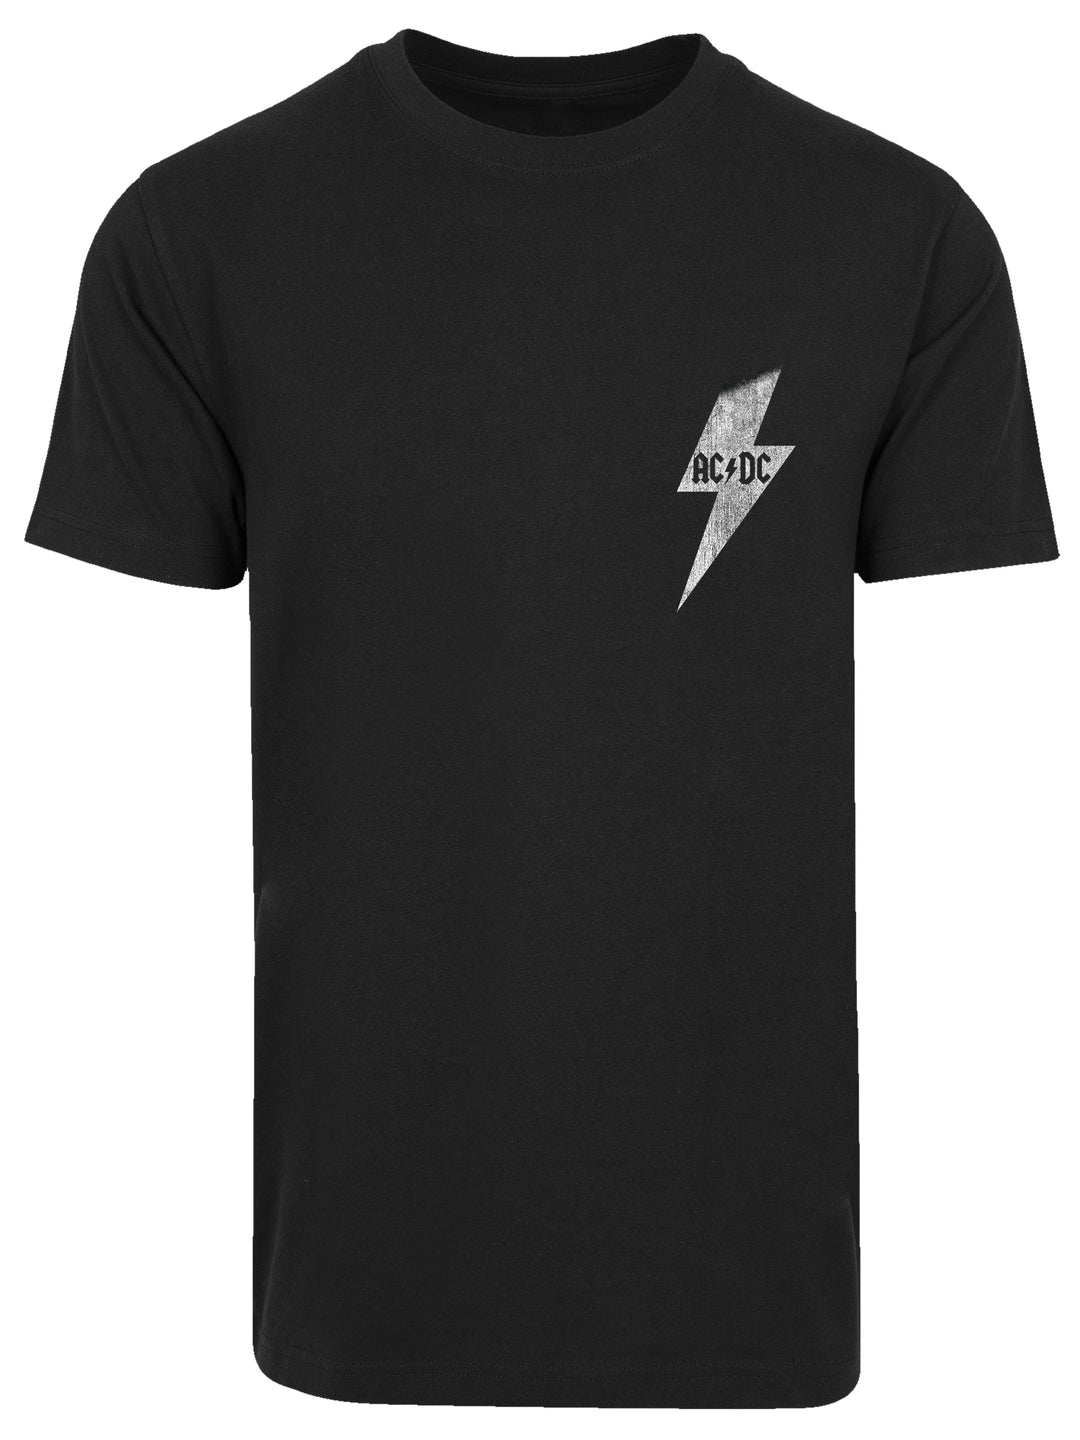 AC/DC Lightning Bolt Pocket Round Neck T-Shirt - Wear Your Love for Rock Loud and Proud